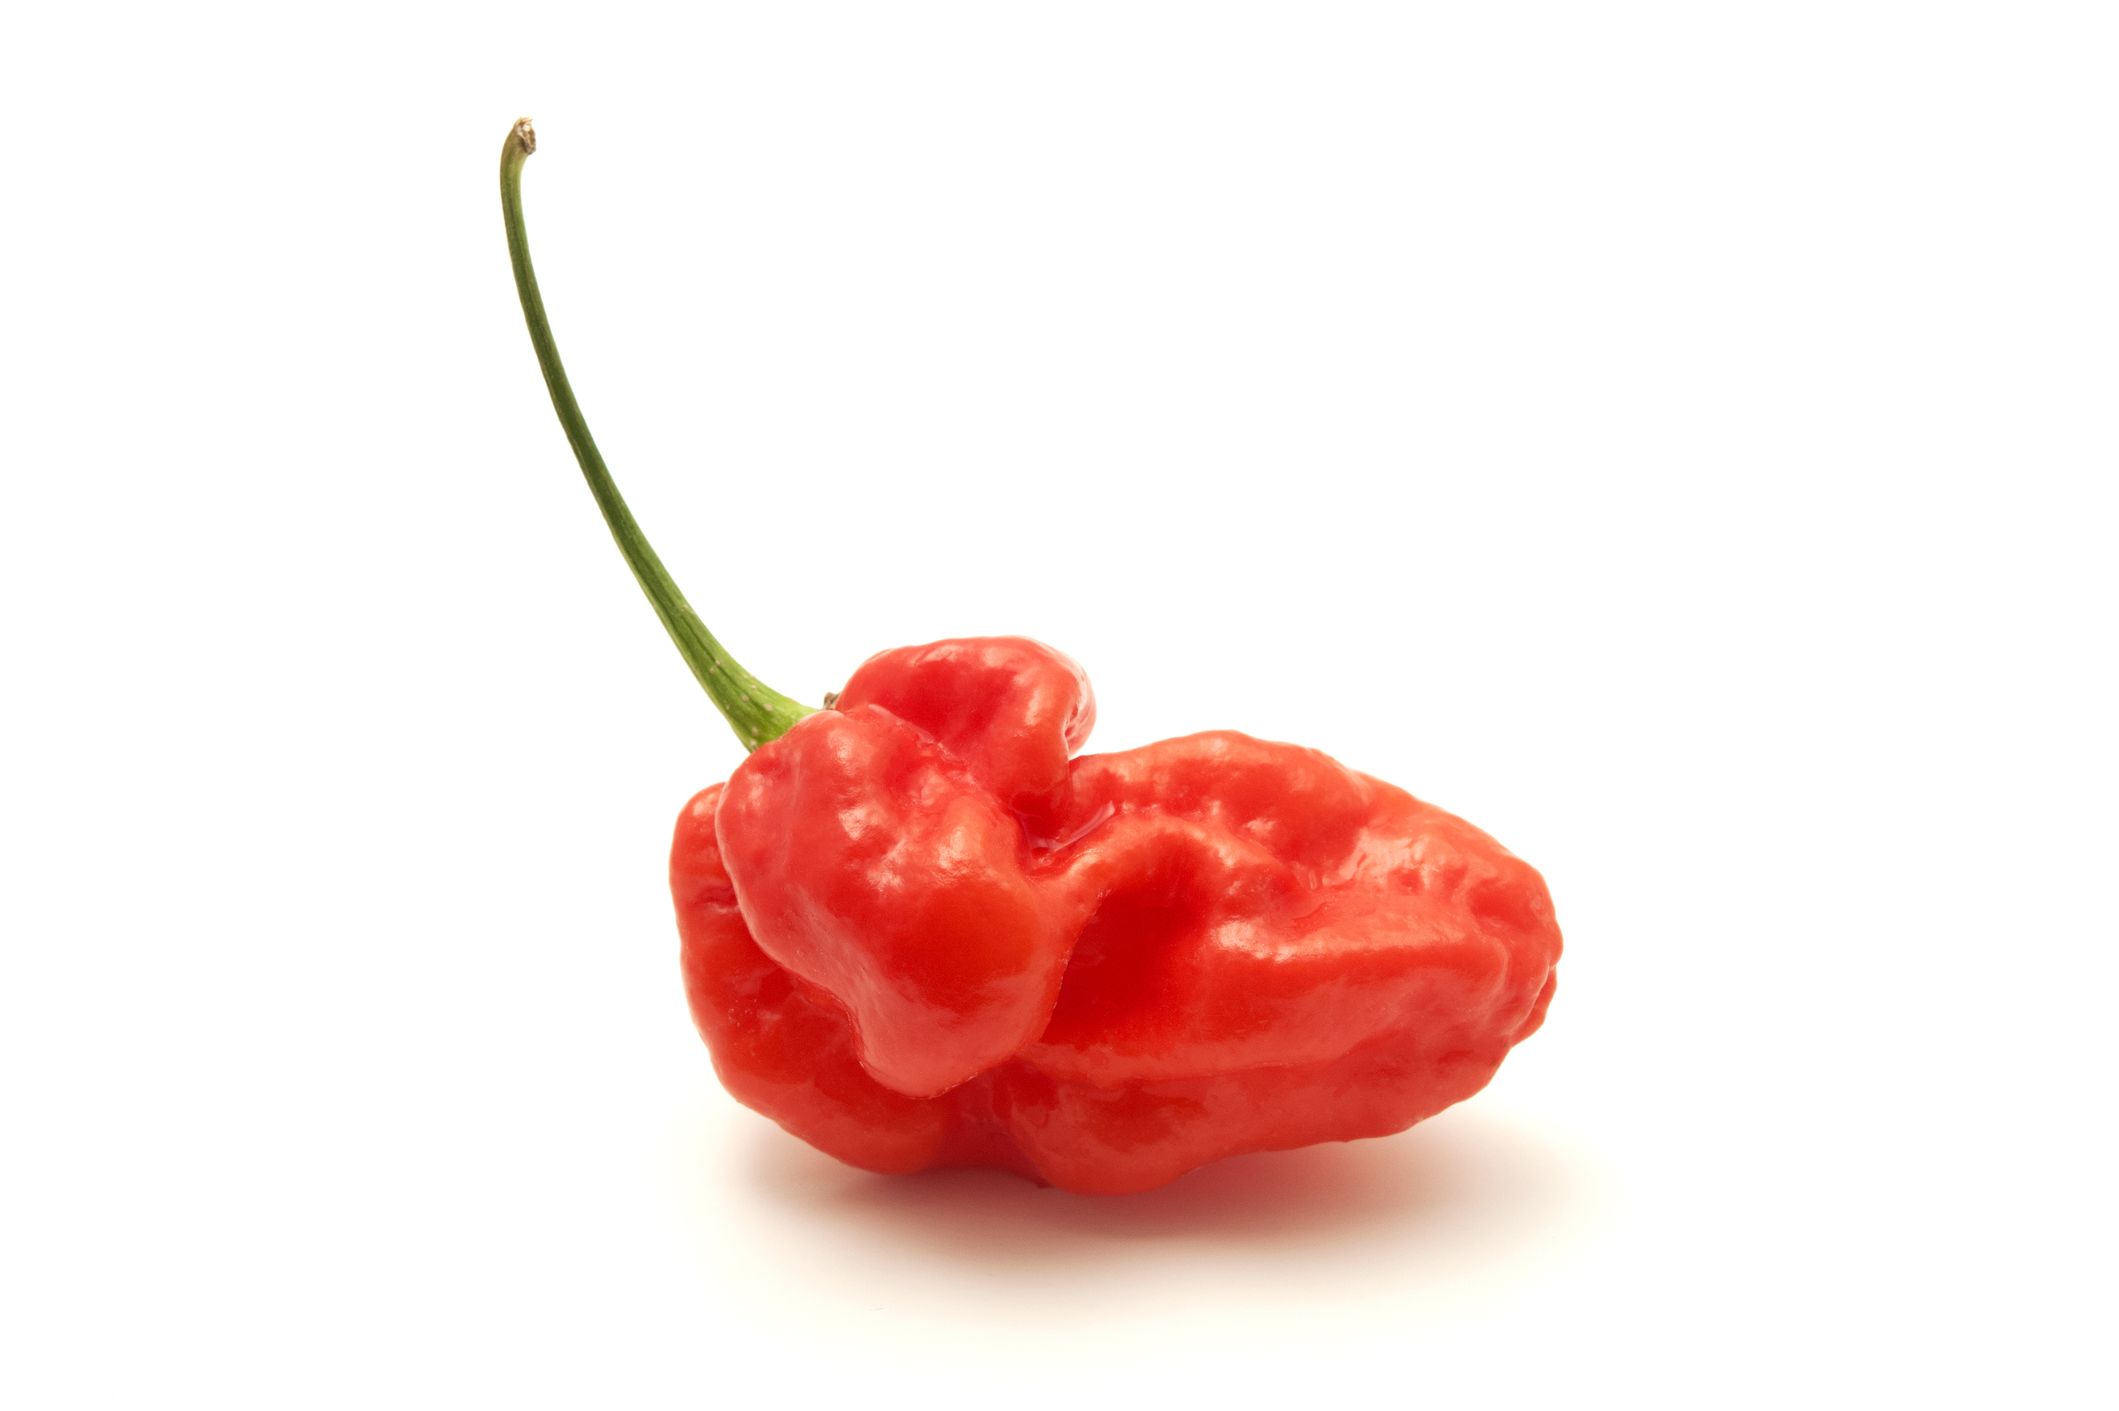 Farmer Sets Out To Grow A Pretty Plant Creates World S Hottest Pepper Instead Mental Floss